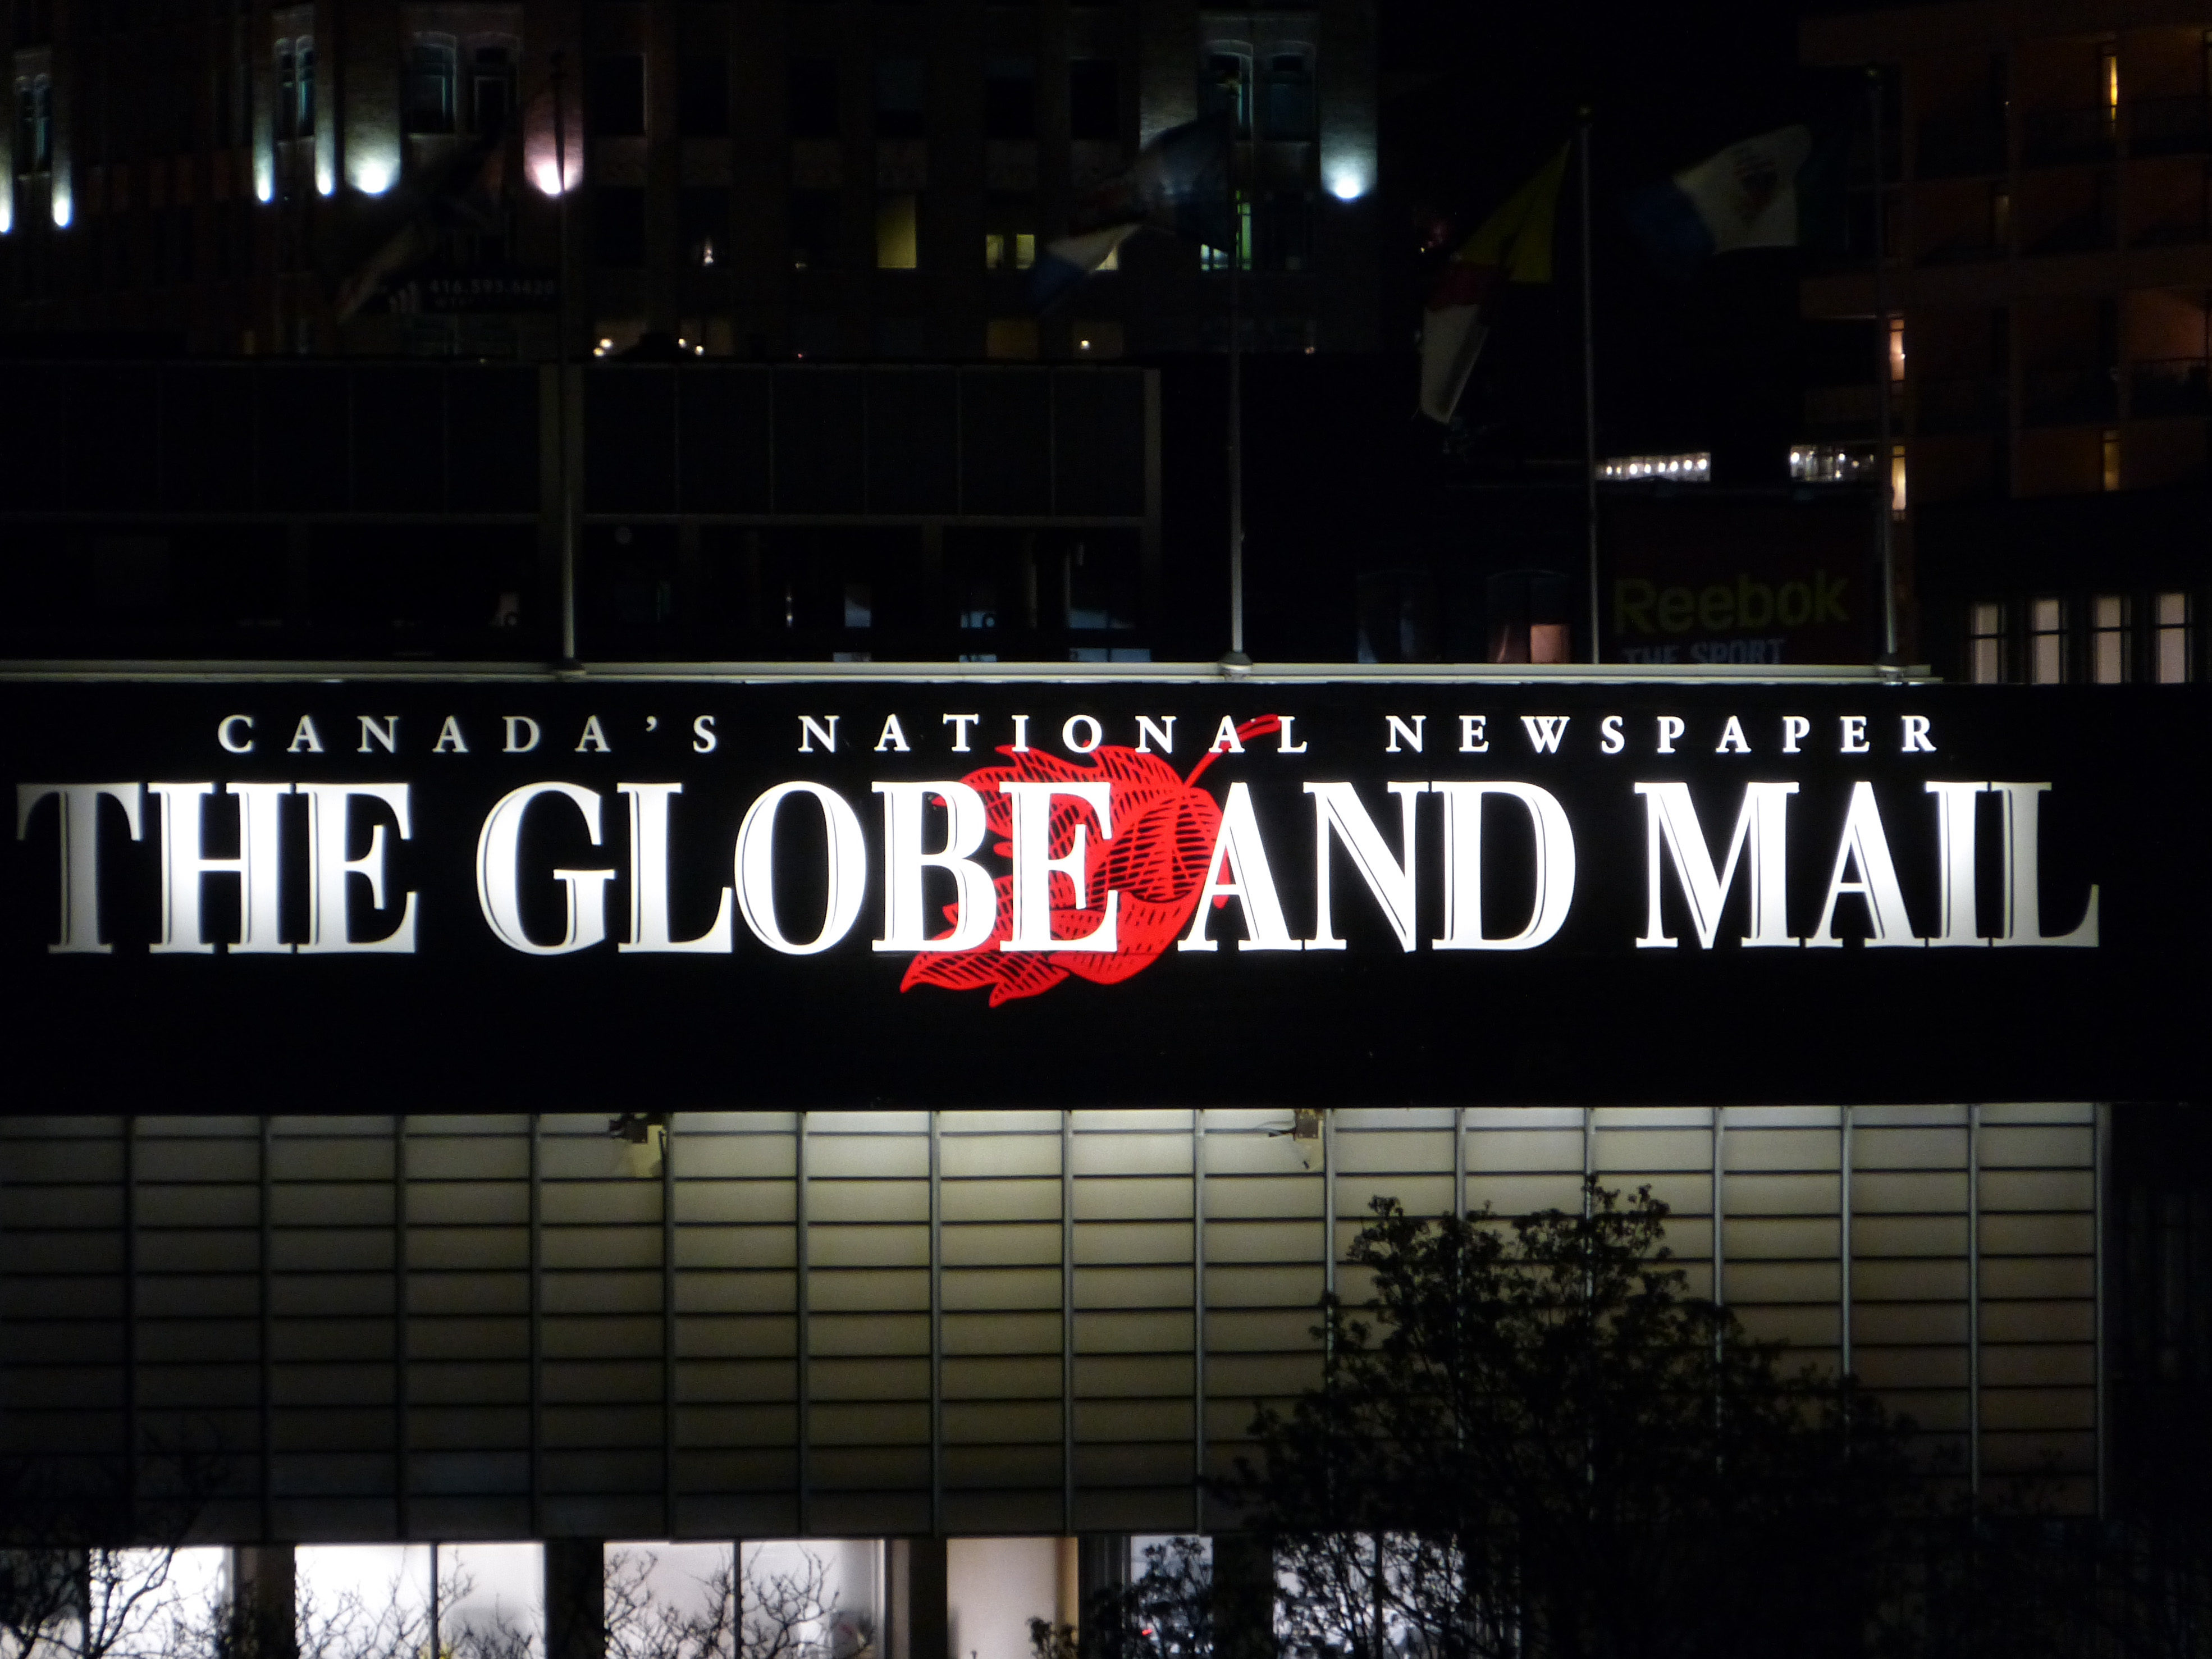 The Globe and Mail sign